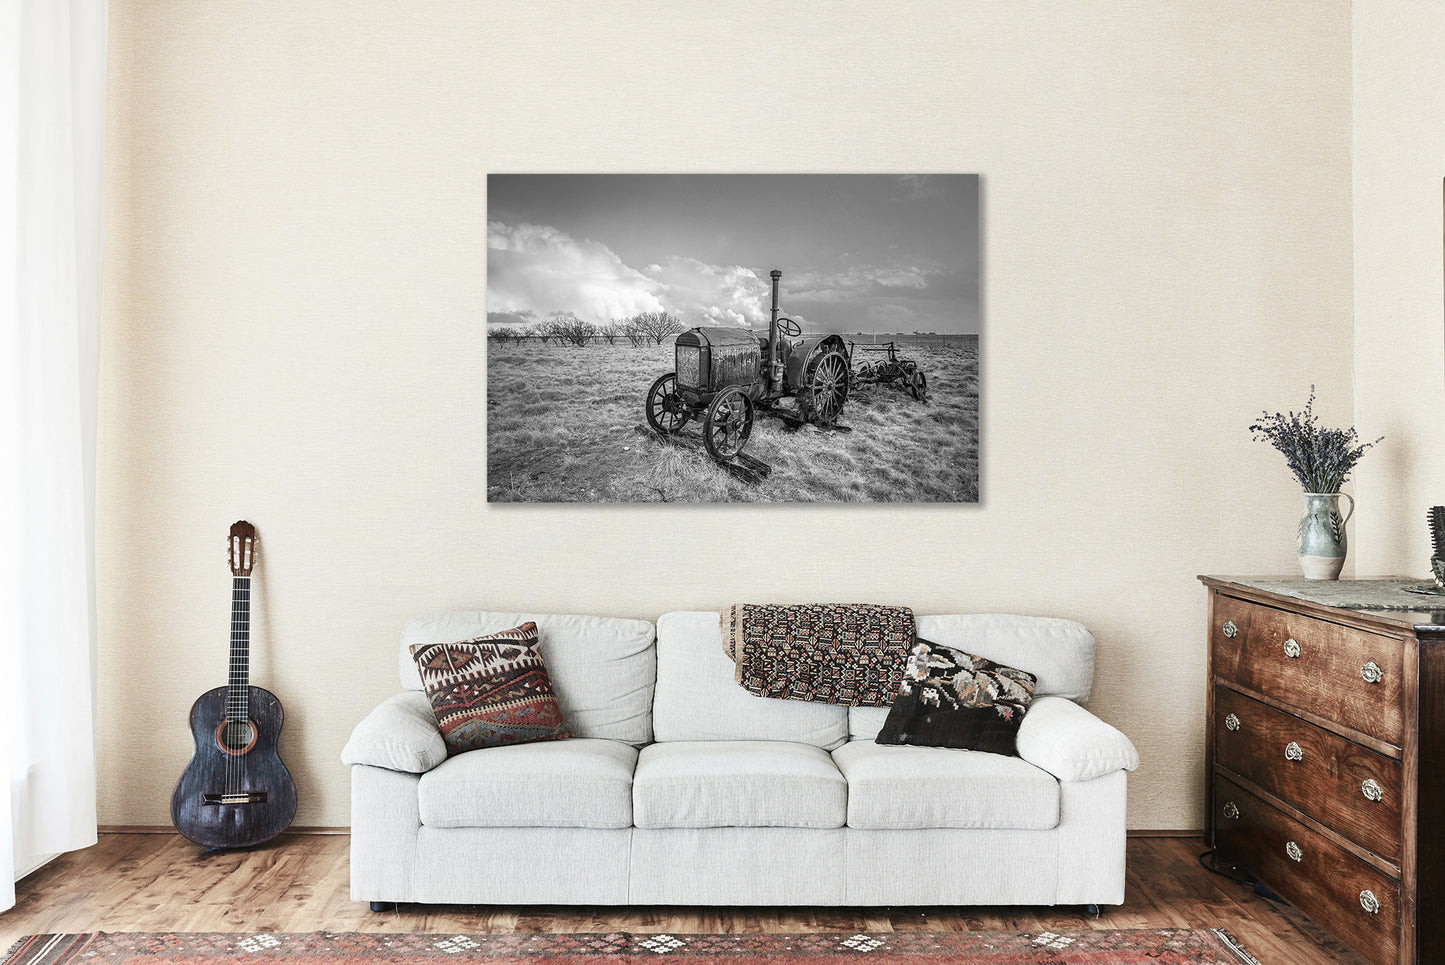 Country Metal Print (Ready to Hang) Black and White Photo on Aluminum of Classic McCormick-Deering Tractor on Stormy Day in Texas Farm Wall Art Farmhouse Decor